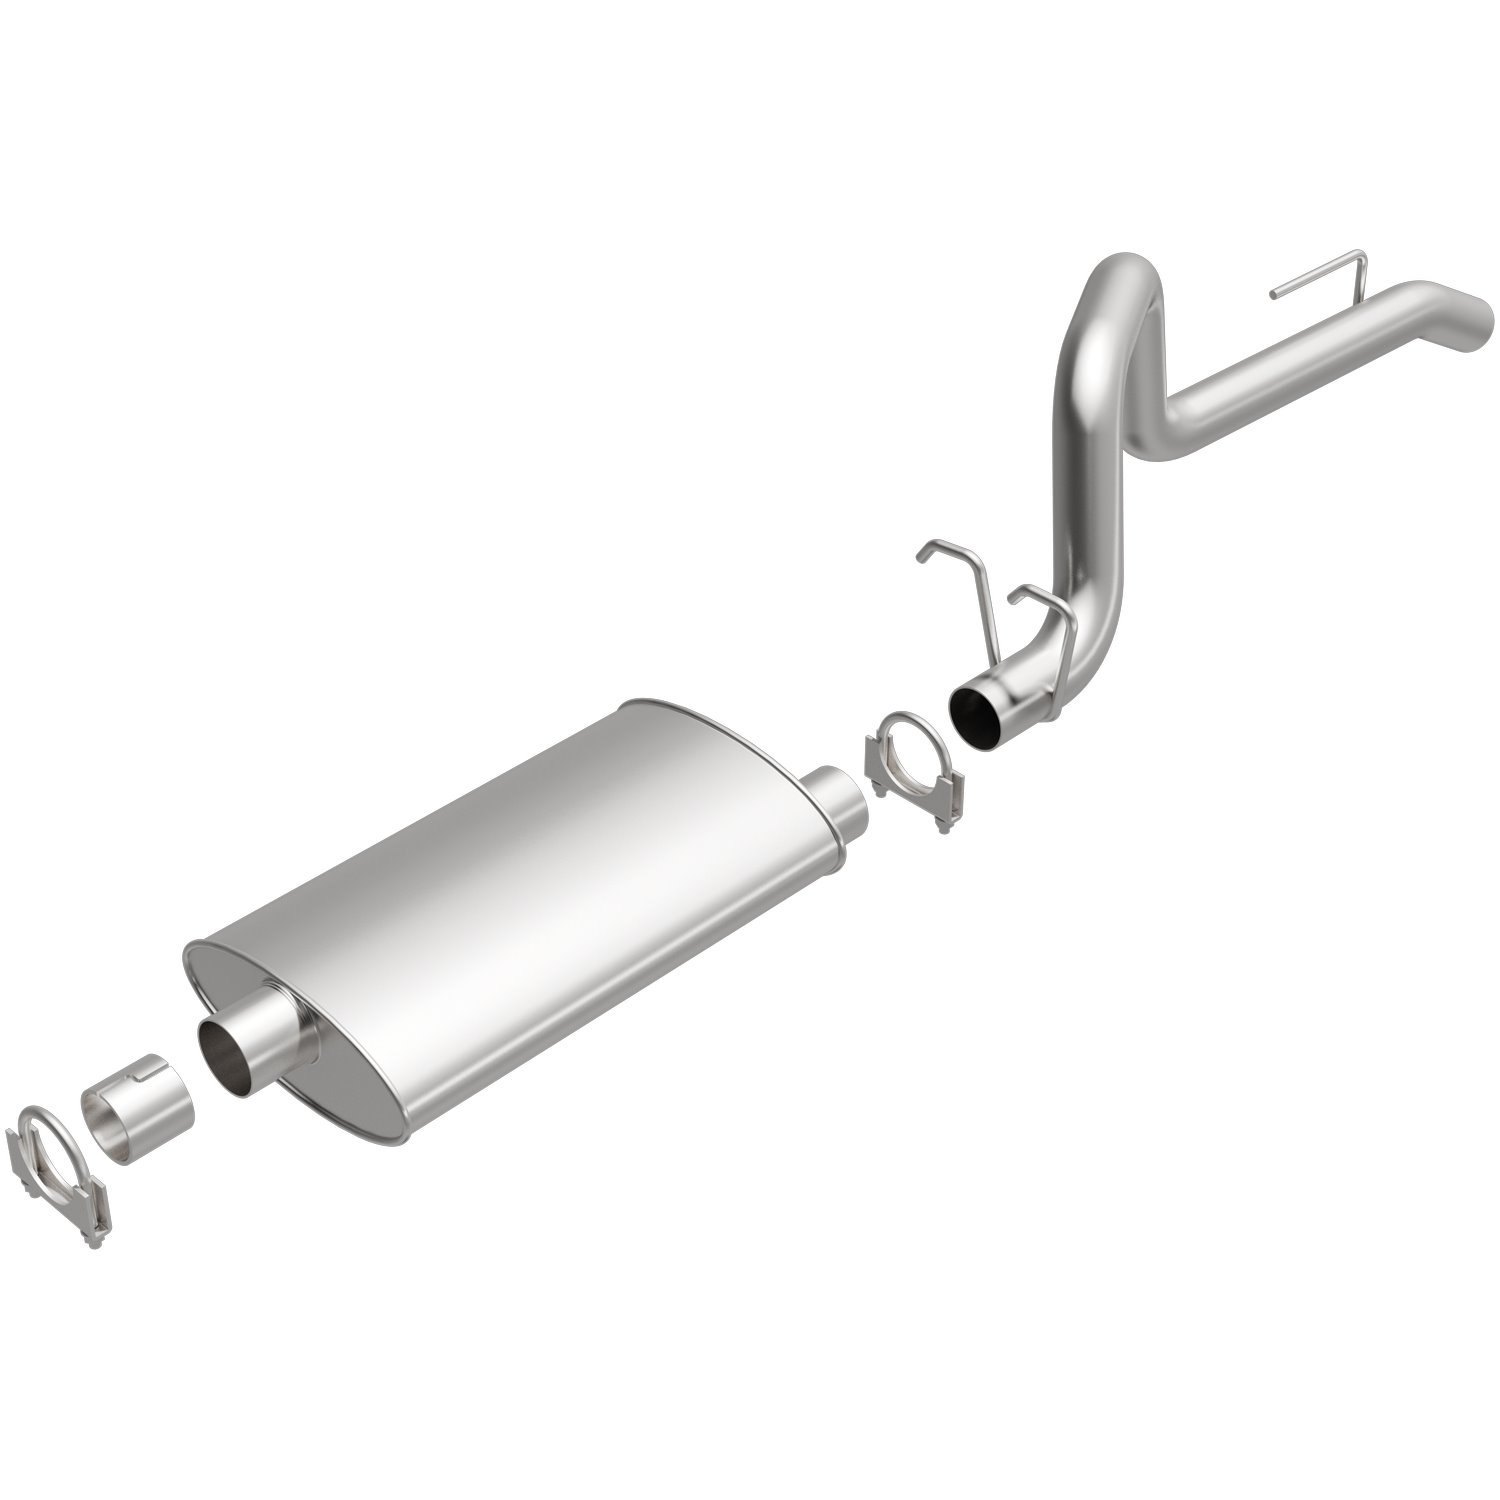 Direct-Fit Exhaust Kit, 1987-1990 Jeep Wrangler